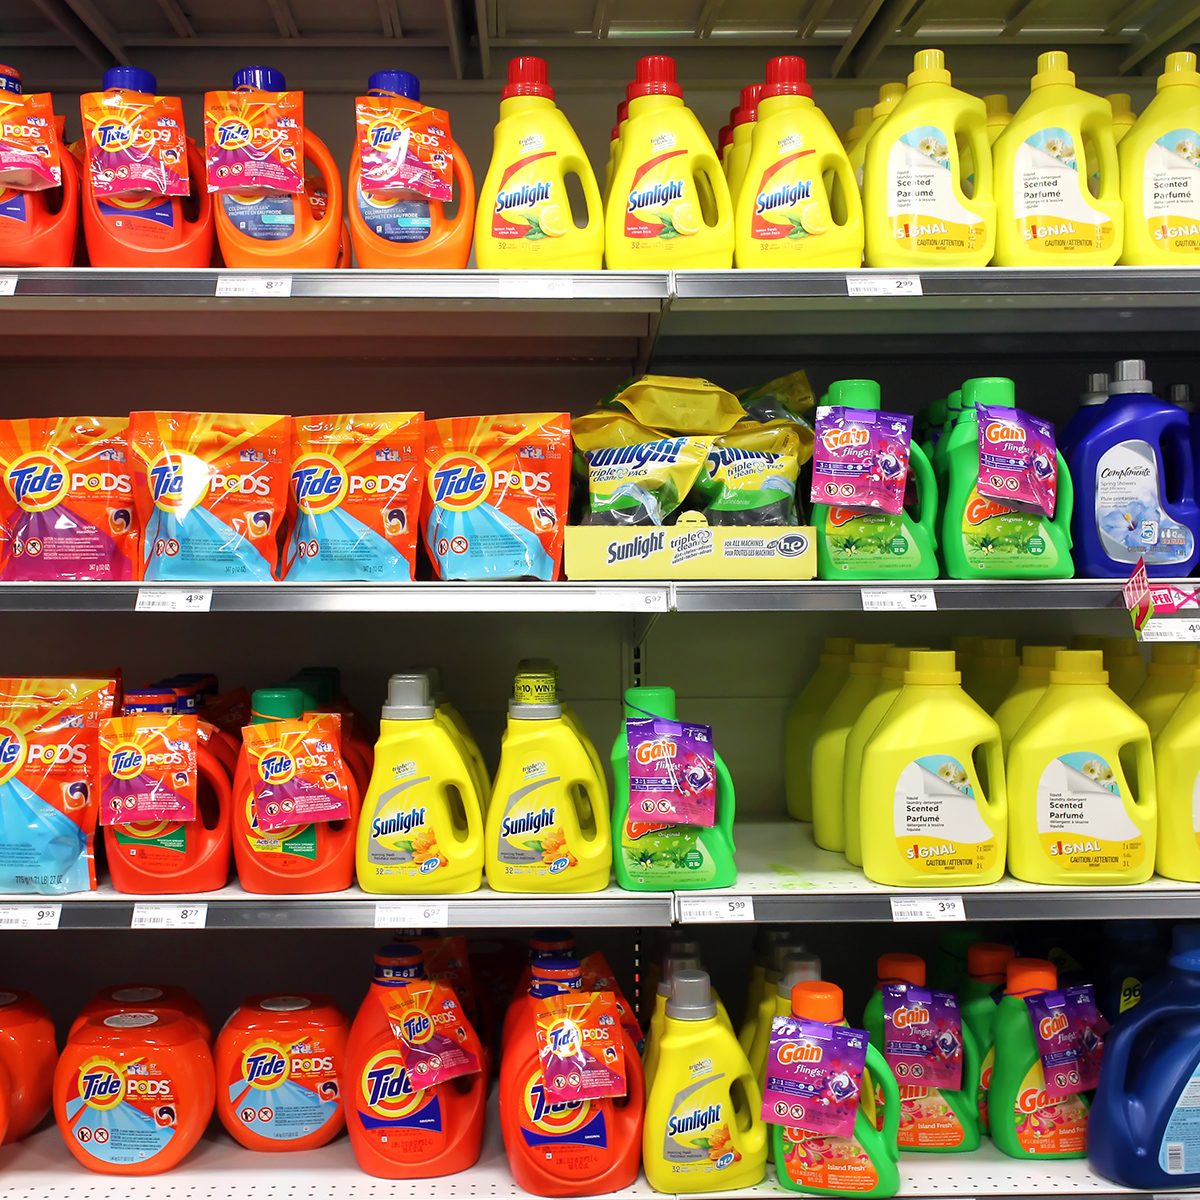 TORONTO, CANADA - MAY 06, 2014: Different types of detergents on shelves in a supermarket. Tide is a laundry detergent manufactured by Procter & Gamble and one of the top three brands of detergents.; Shutterstock ID 230120146